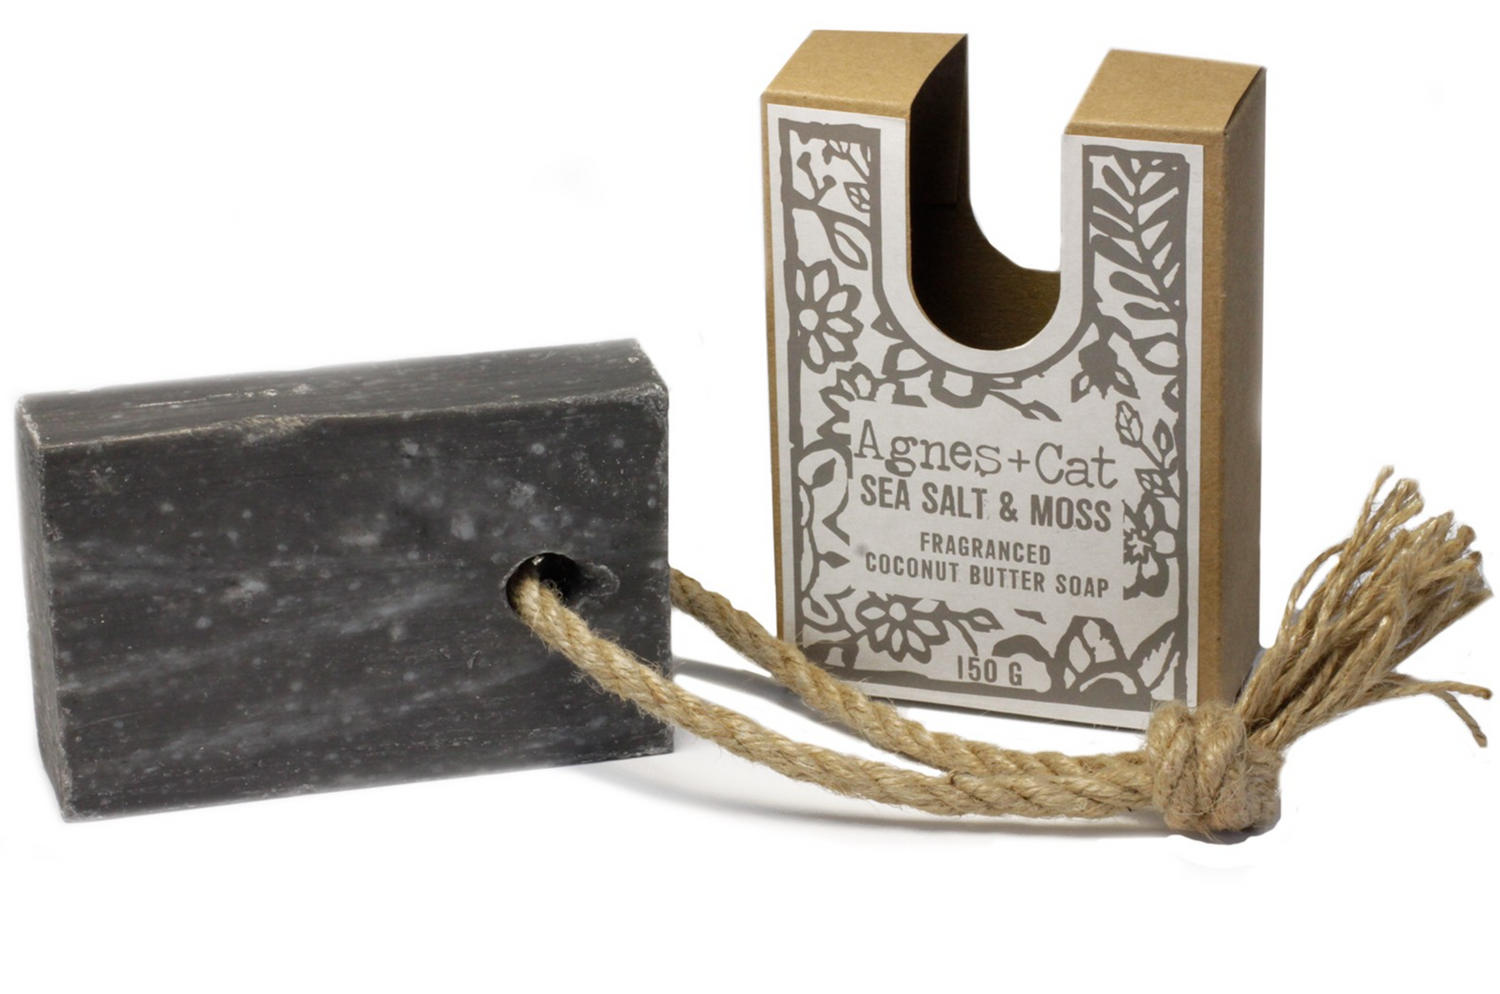 Sea Salt and Moss Soap on a Rope